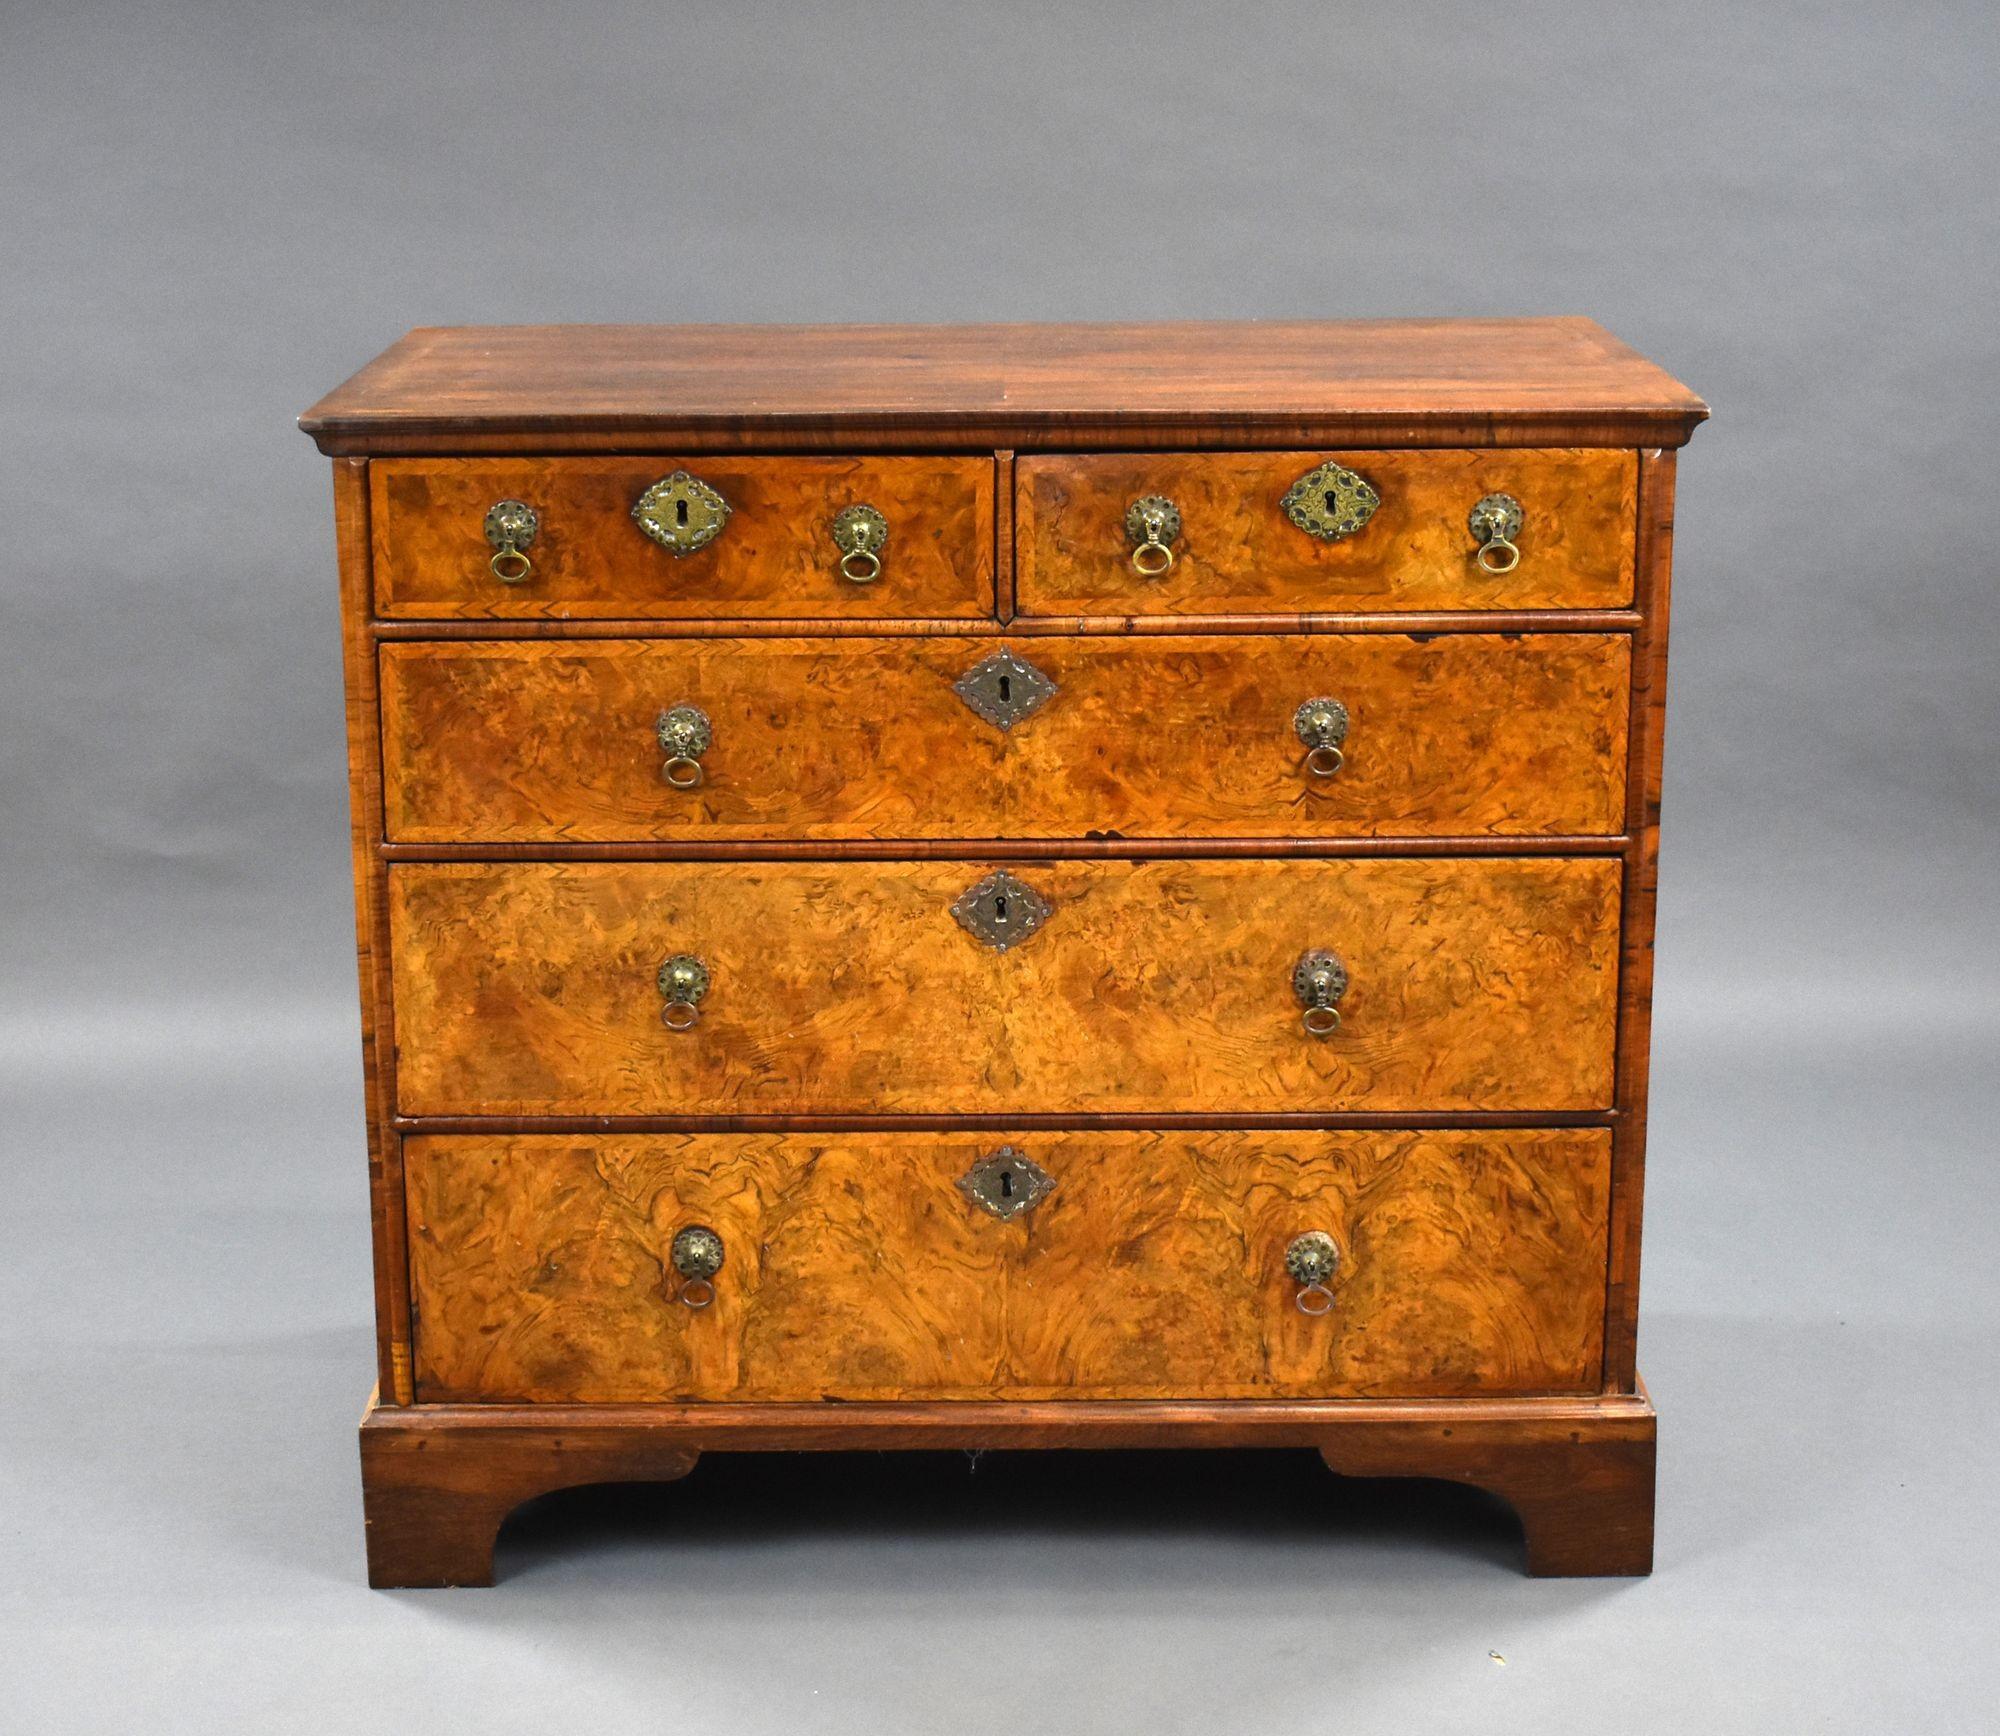 For sale is a good quality George II burr walnut chest of drawers, having a feather banded top above an arrangement of five drawers, each with original handles. The chest remains in very good condition for its age.
Measures: width: 101cm, depth: